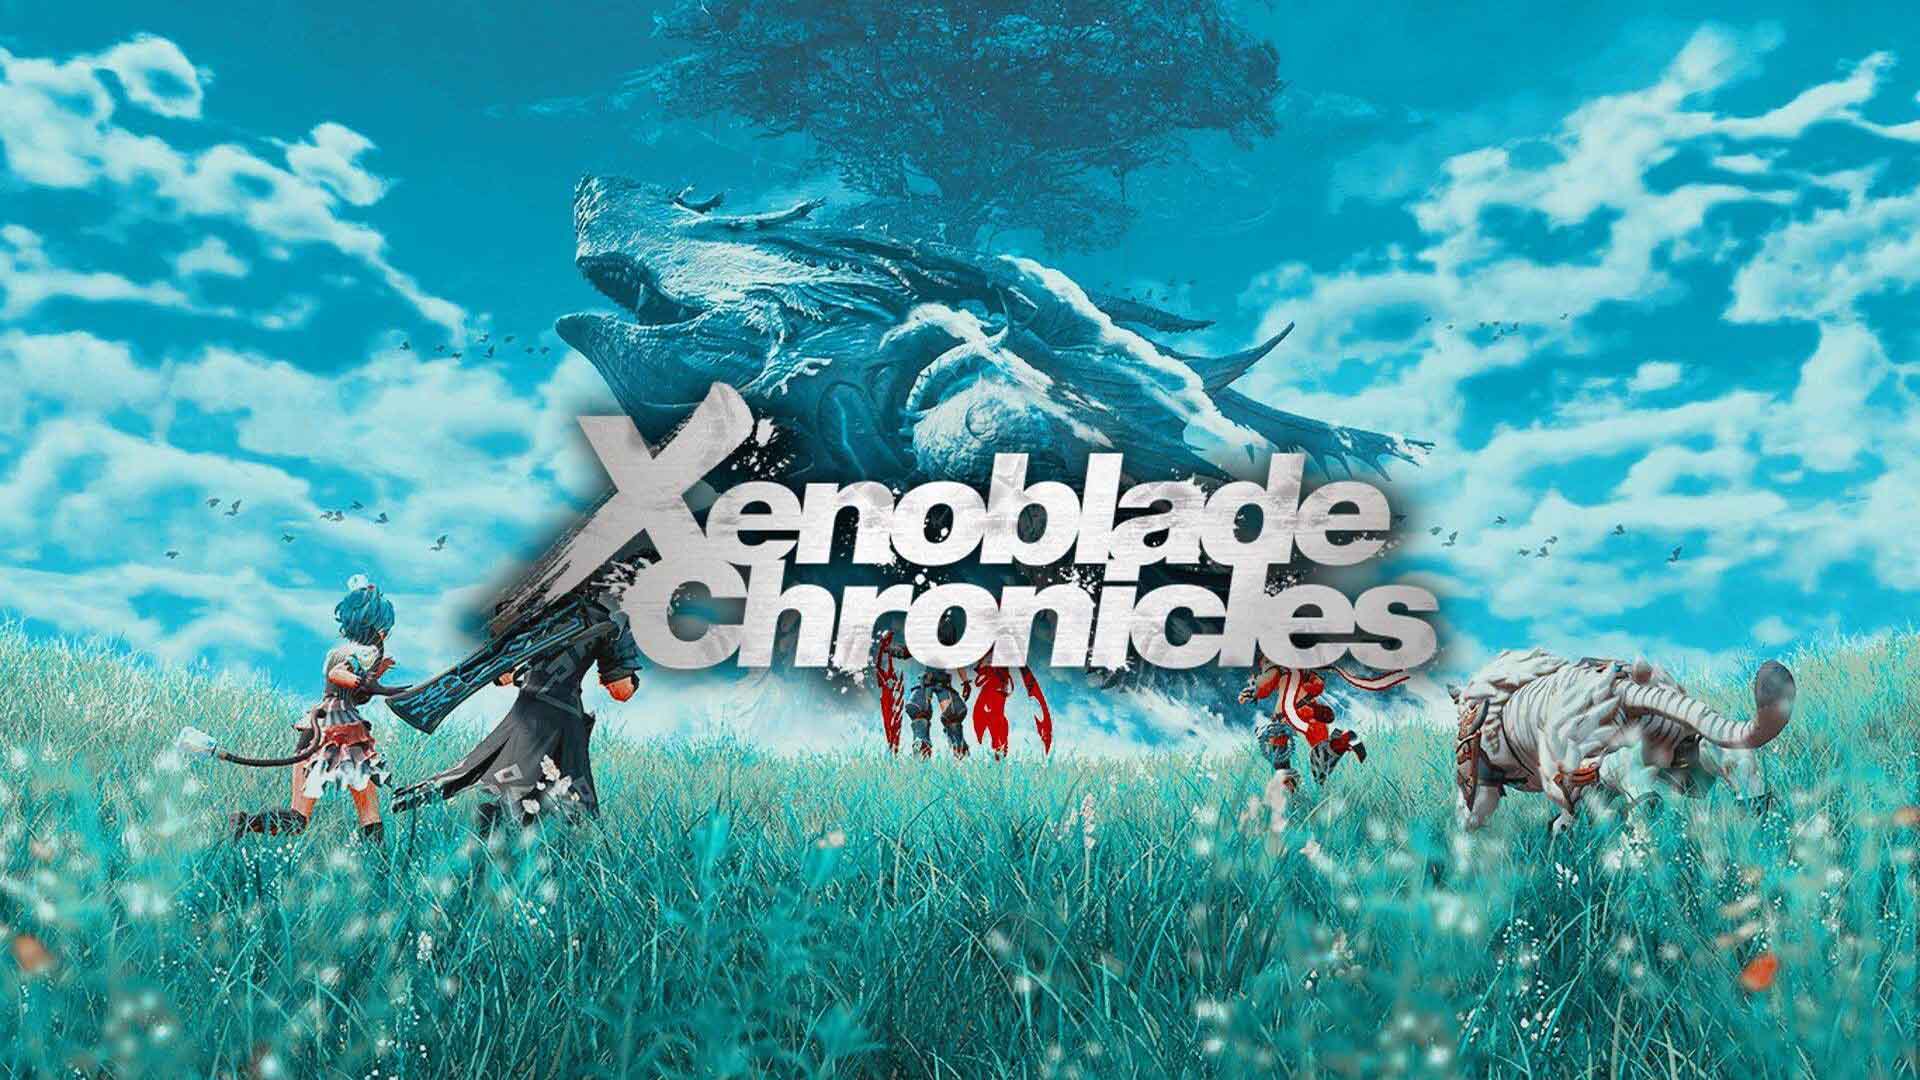 Xenoblade Chronicles 3 could arrive in according to an insider